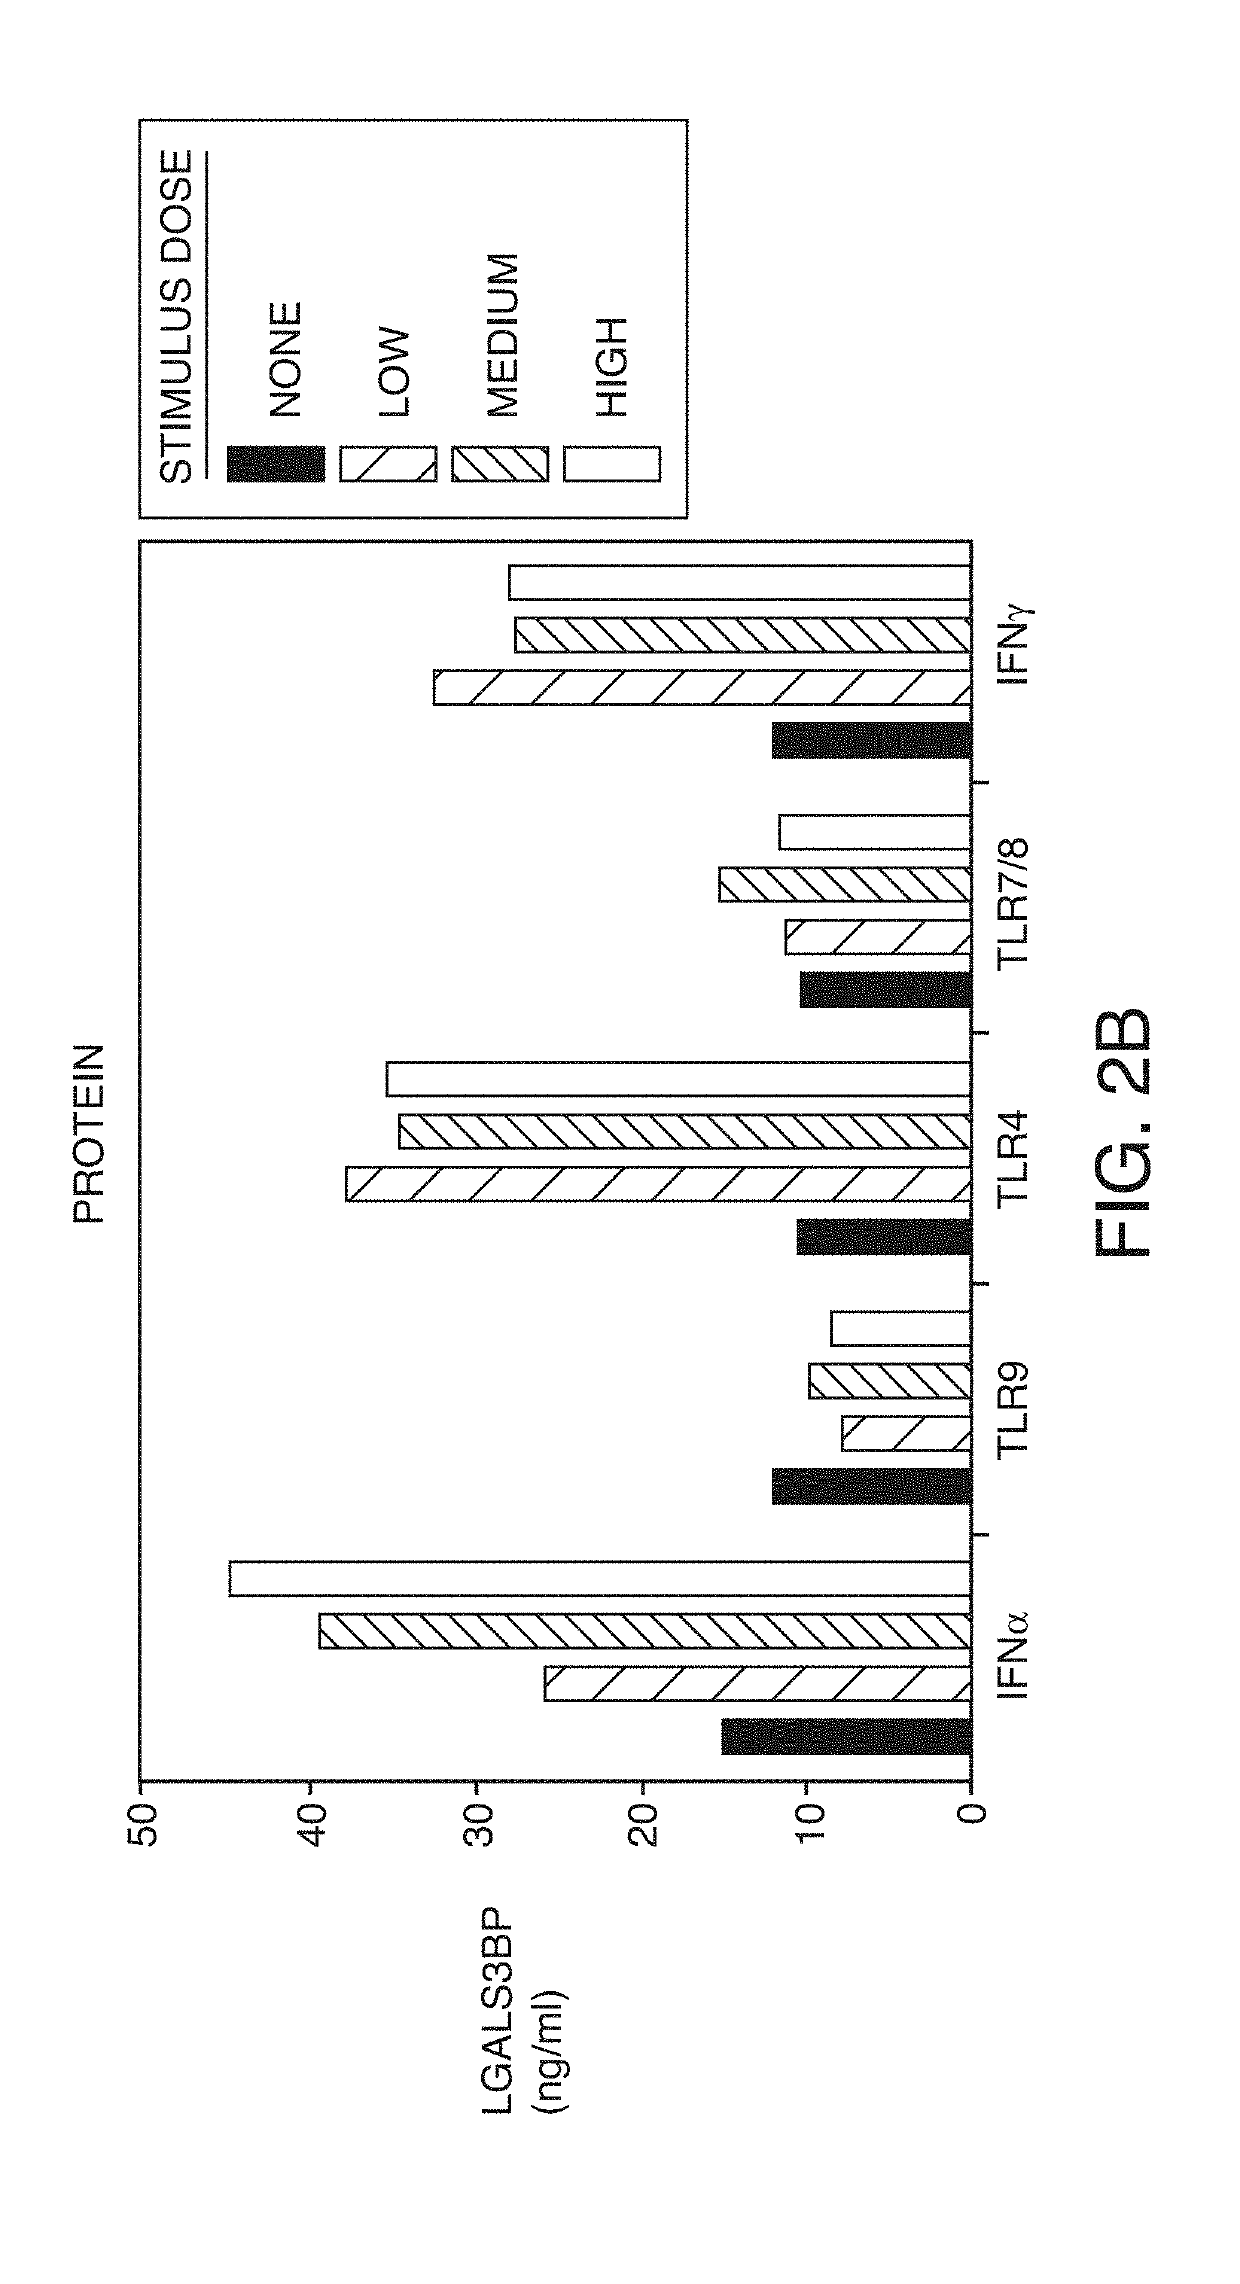 Methods for the use of galectin 3 binding protein detected in the urine for monitoring the severity and progression of lupus nephritis